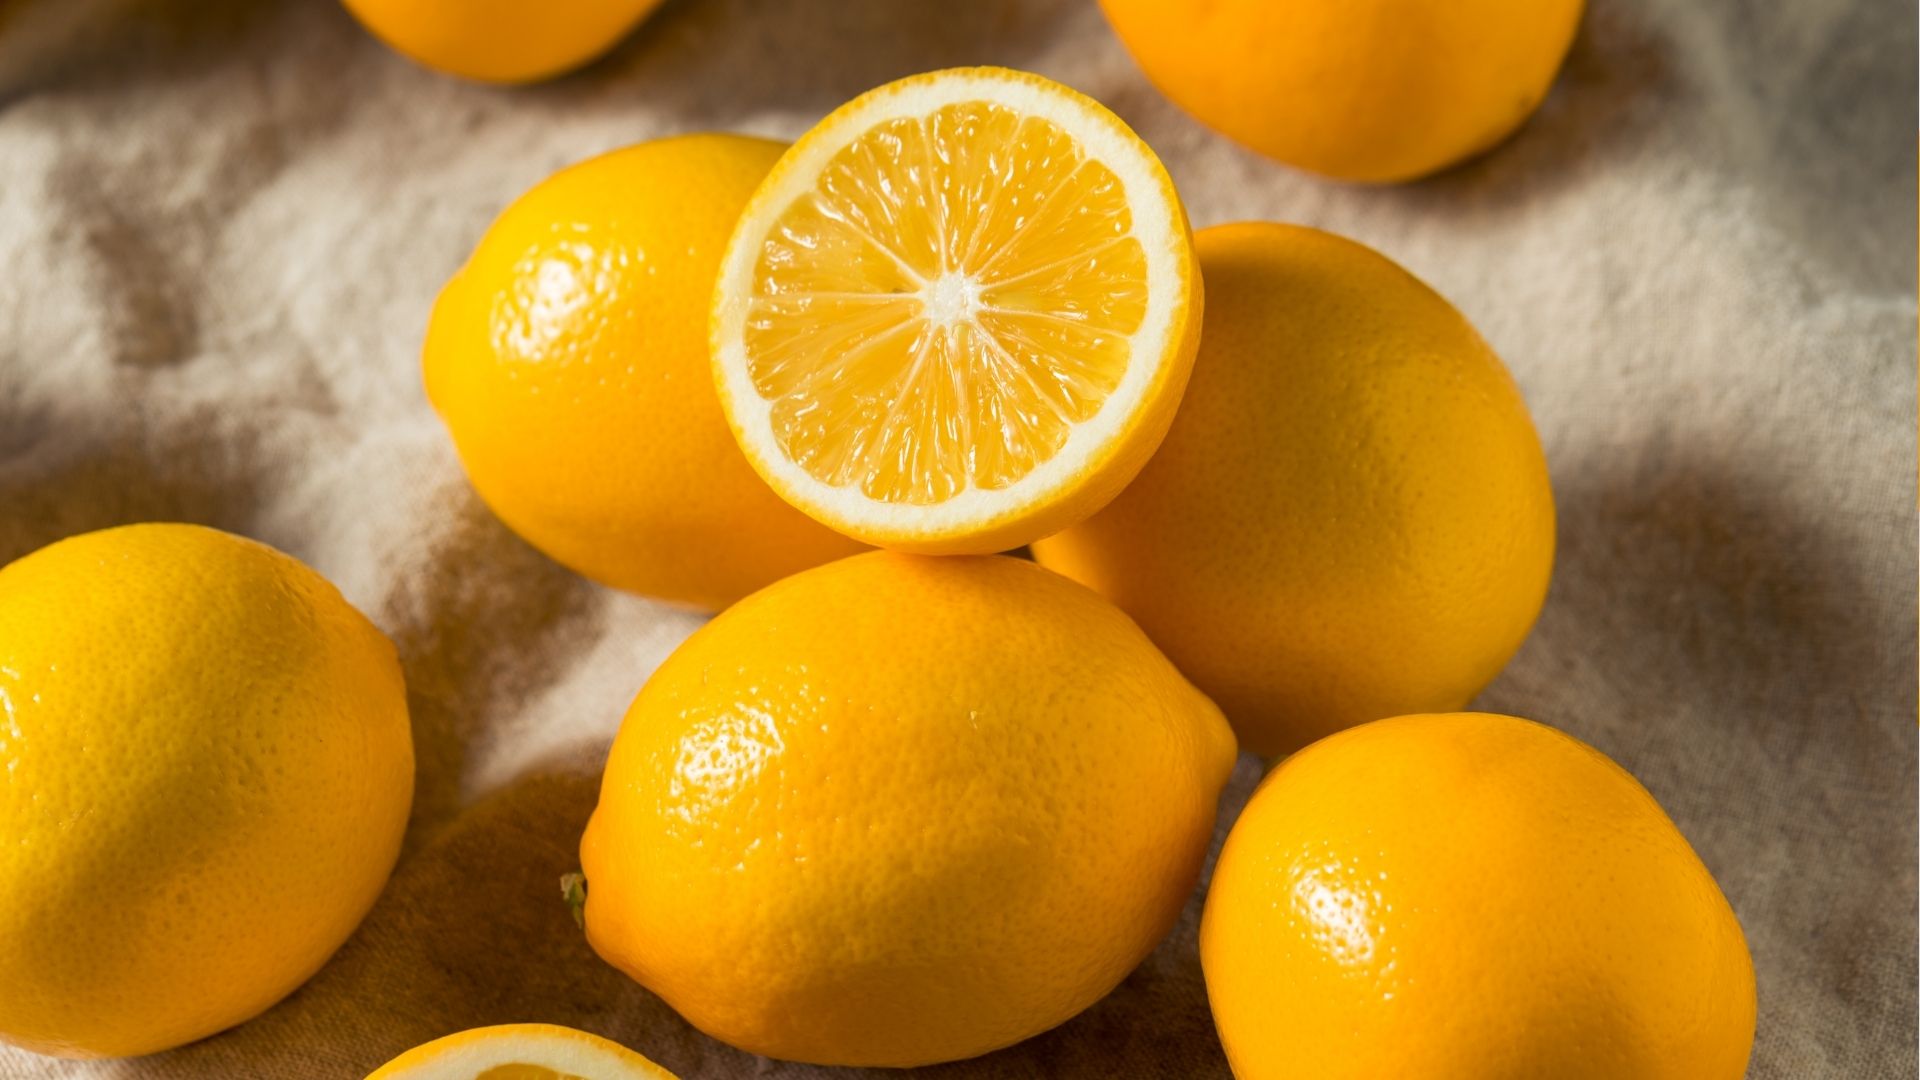 meyer lemons on display on a table with one lemon sliced open to showing the inside